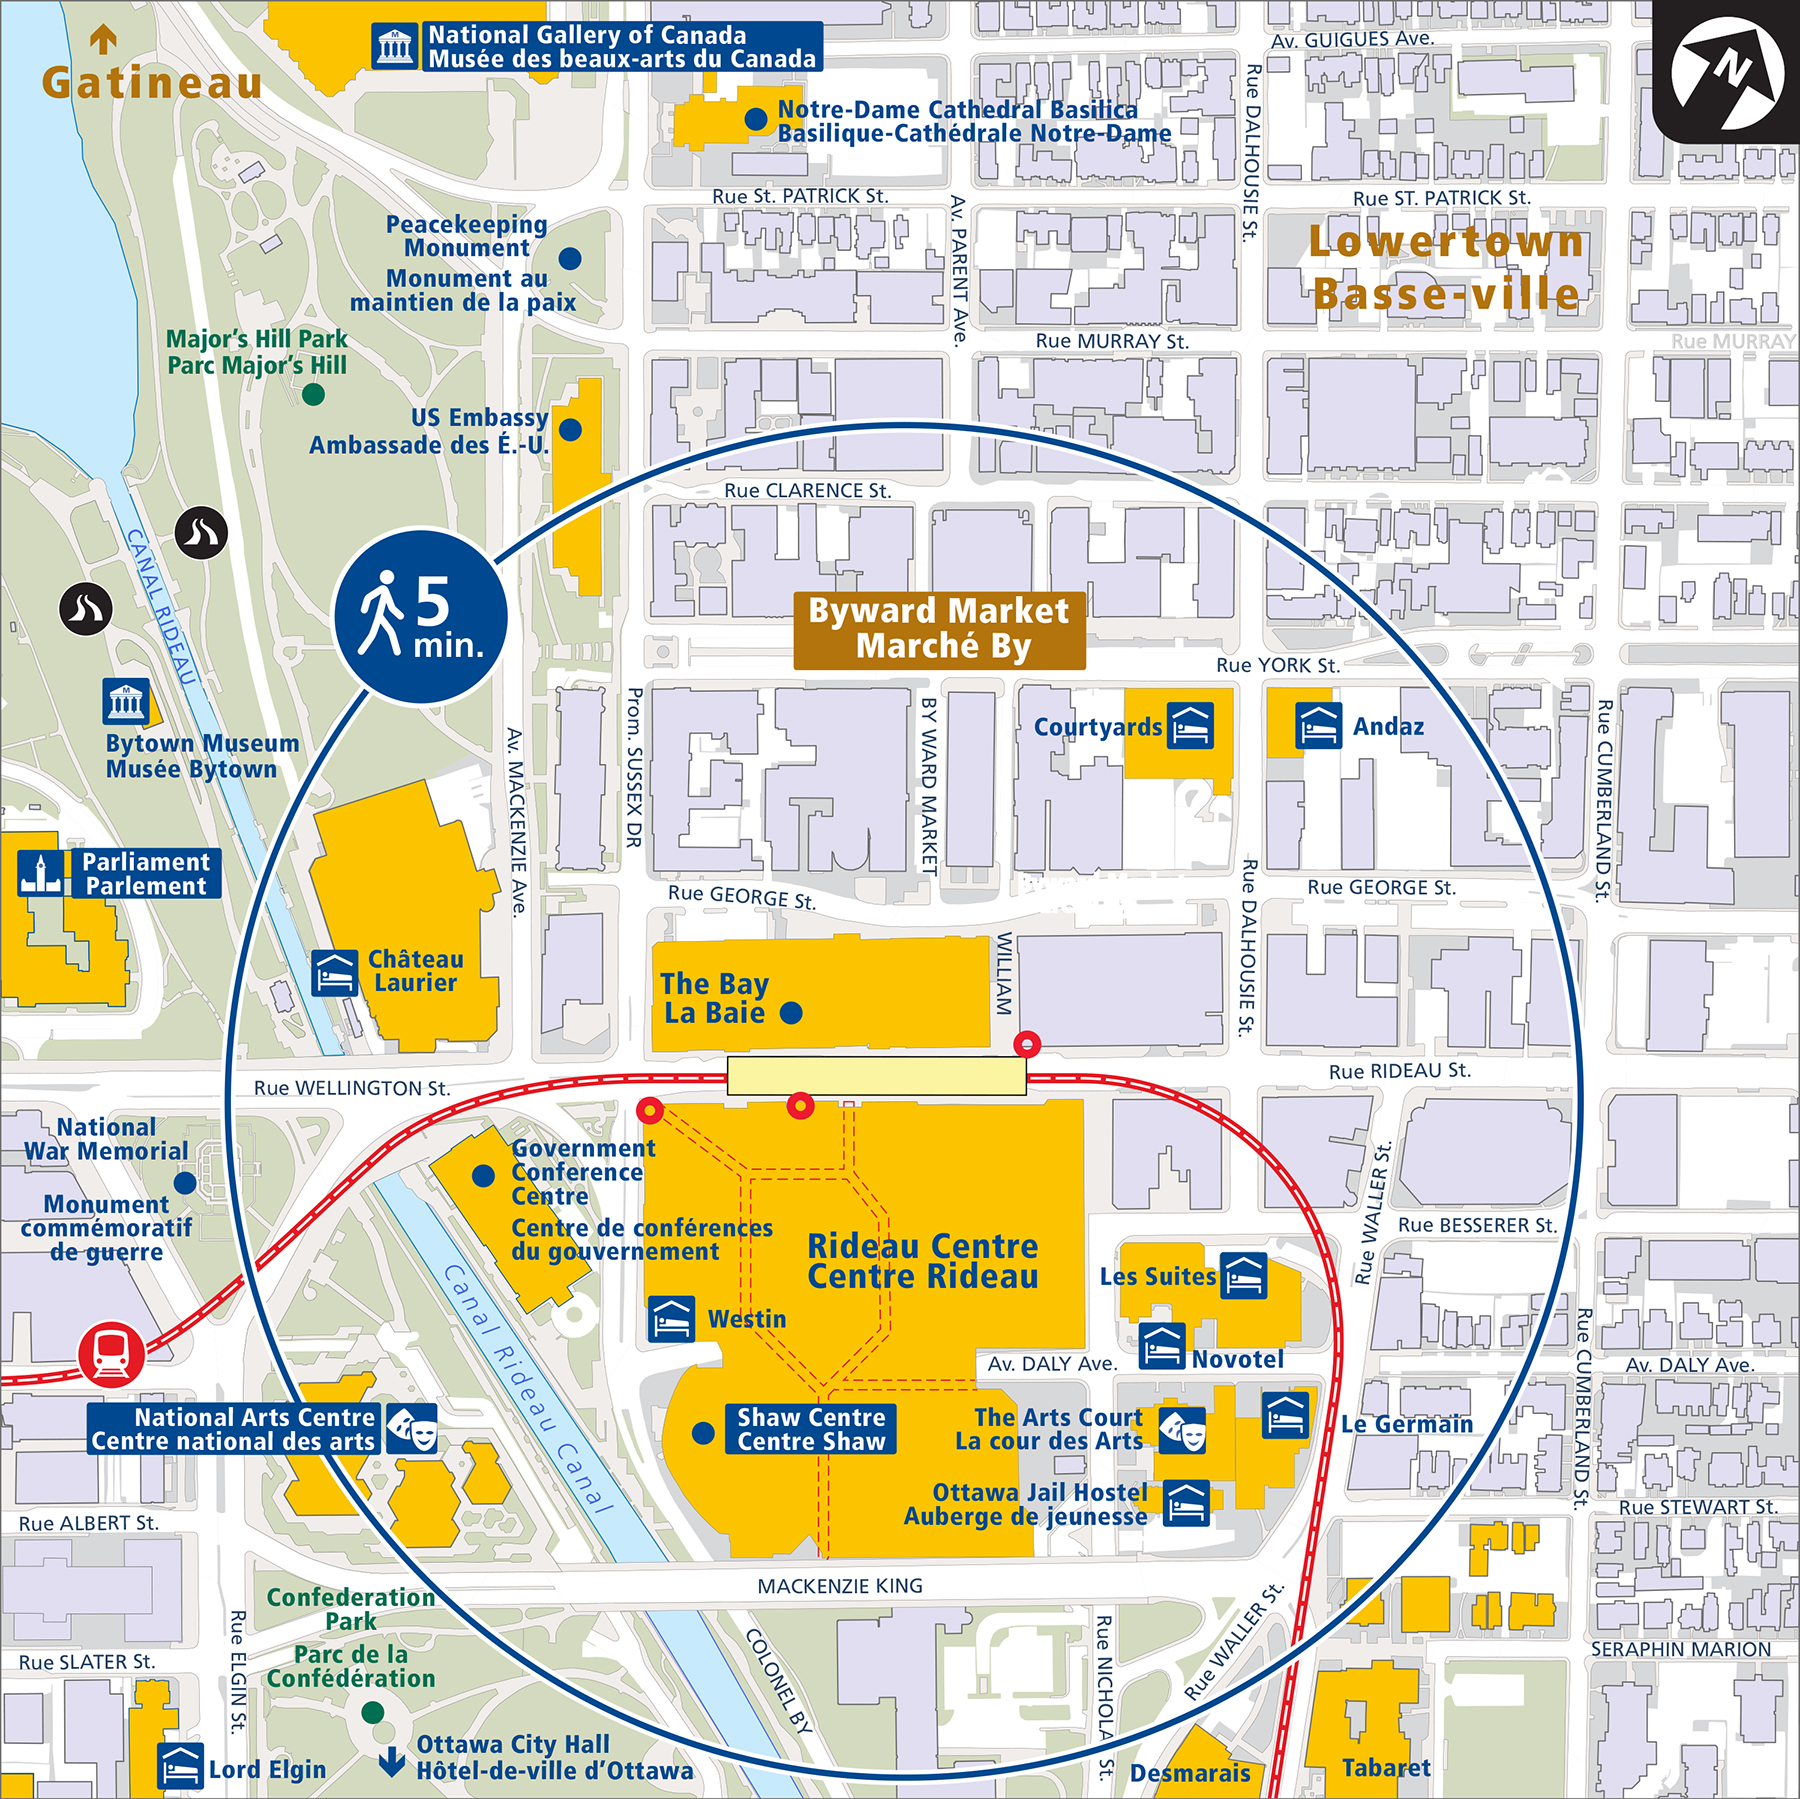 A carte representing some places of interest within a 5-minute walk of Rideau Station